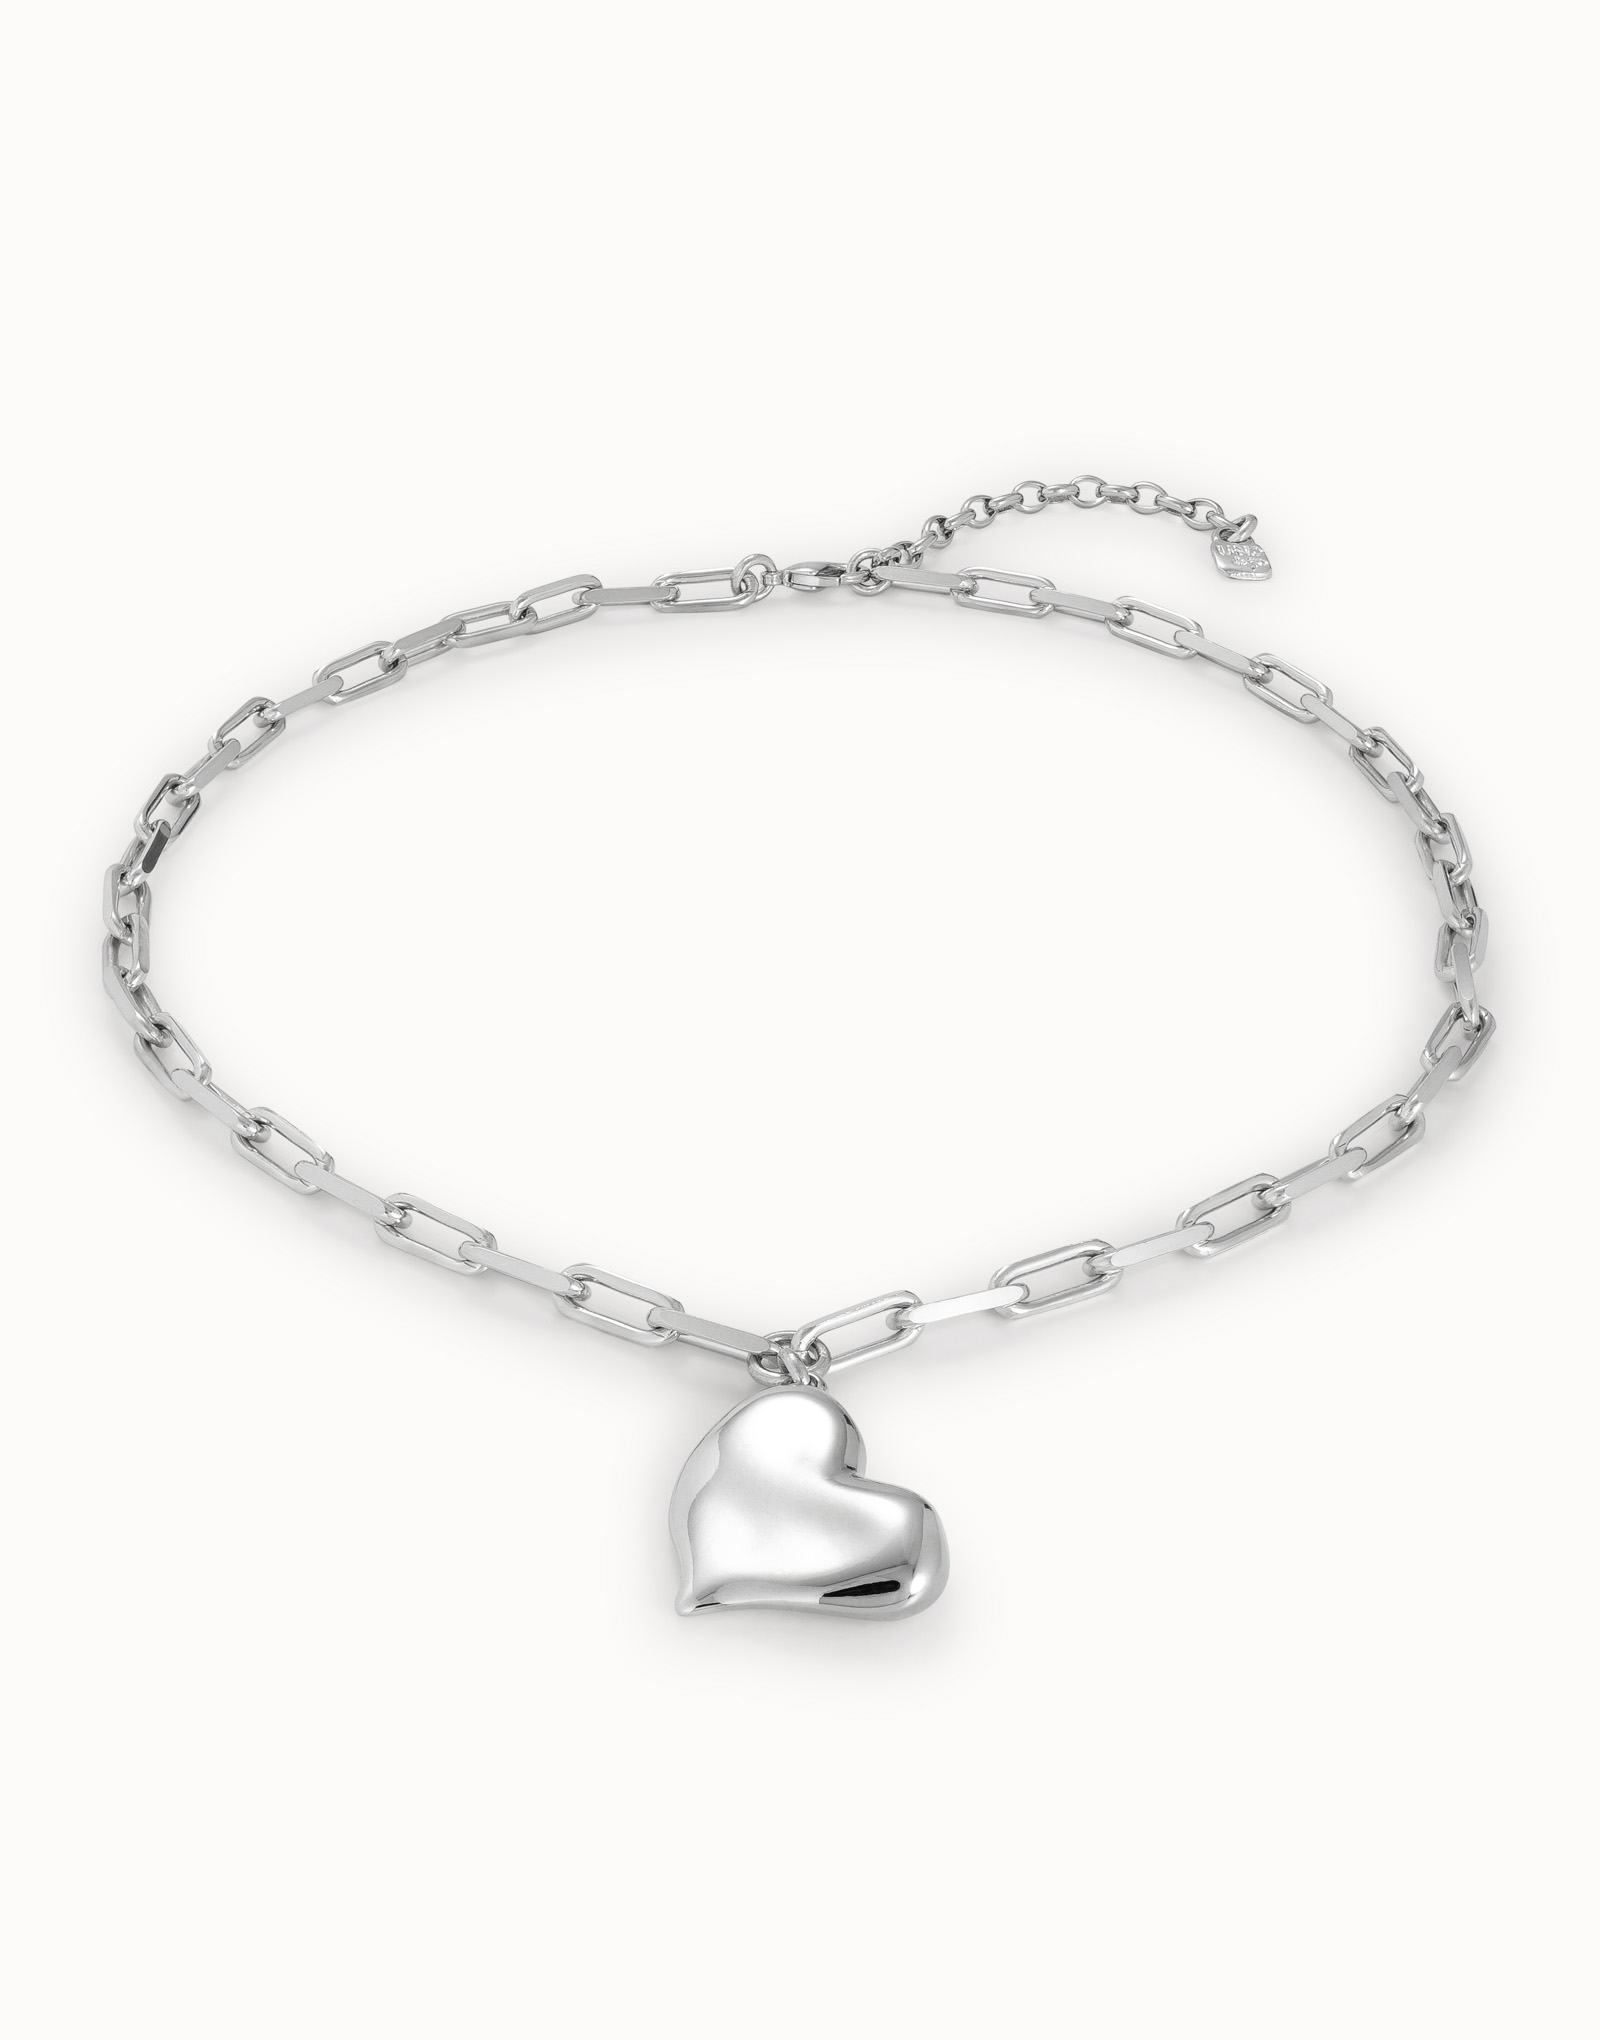 Collana corta placcata argento Sterling, catenina a maglie medie e cuore medio, Argent, large image number null